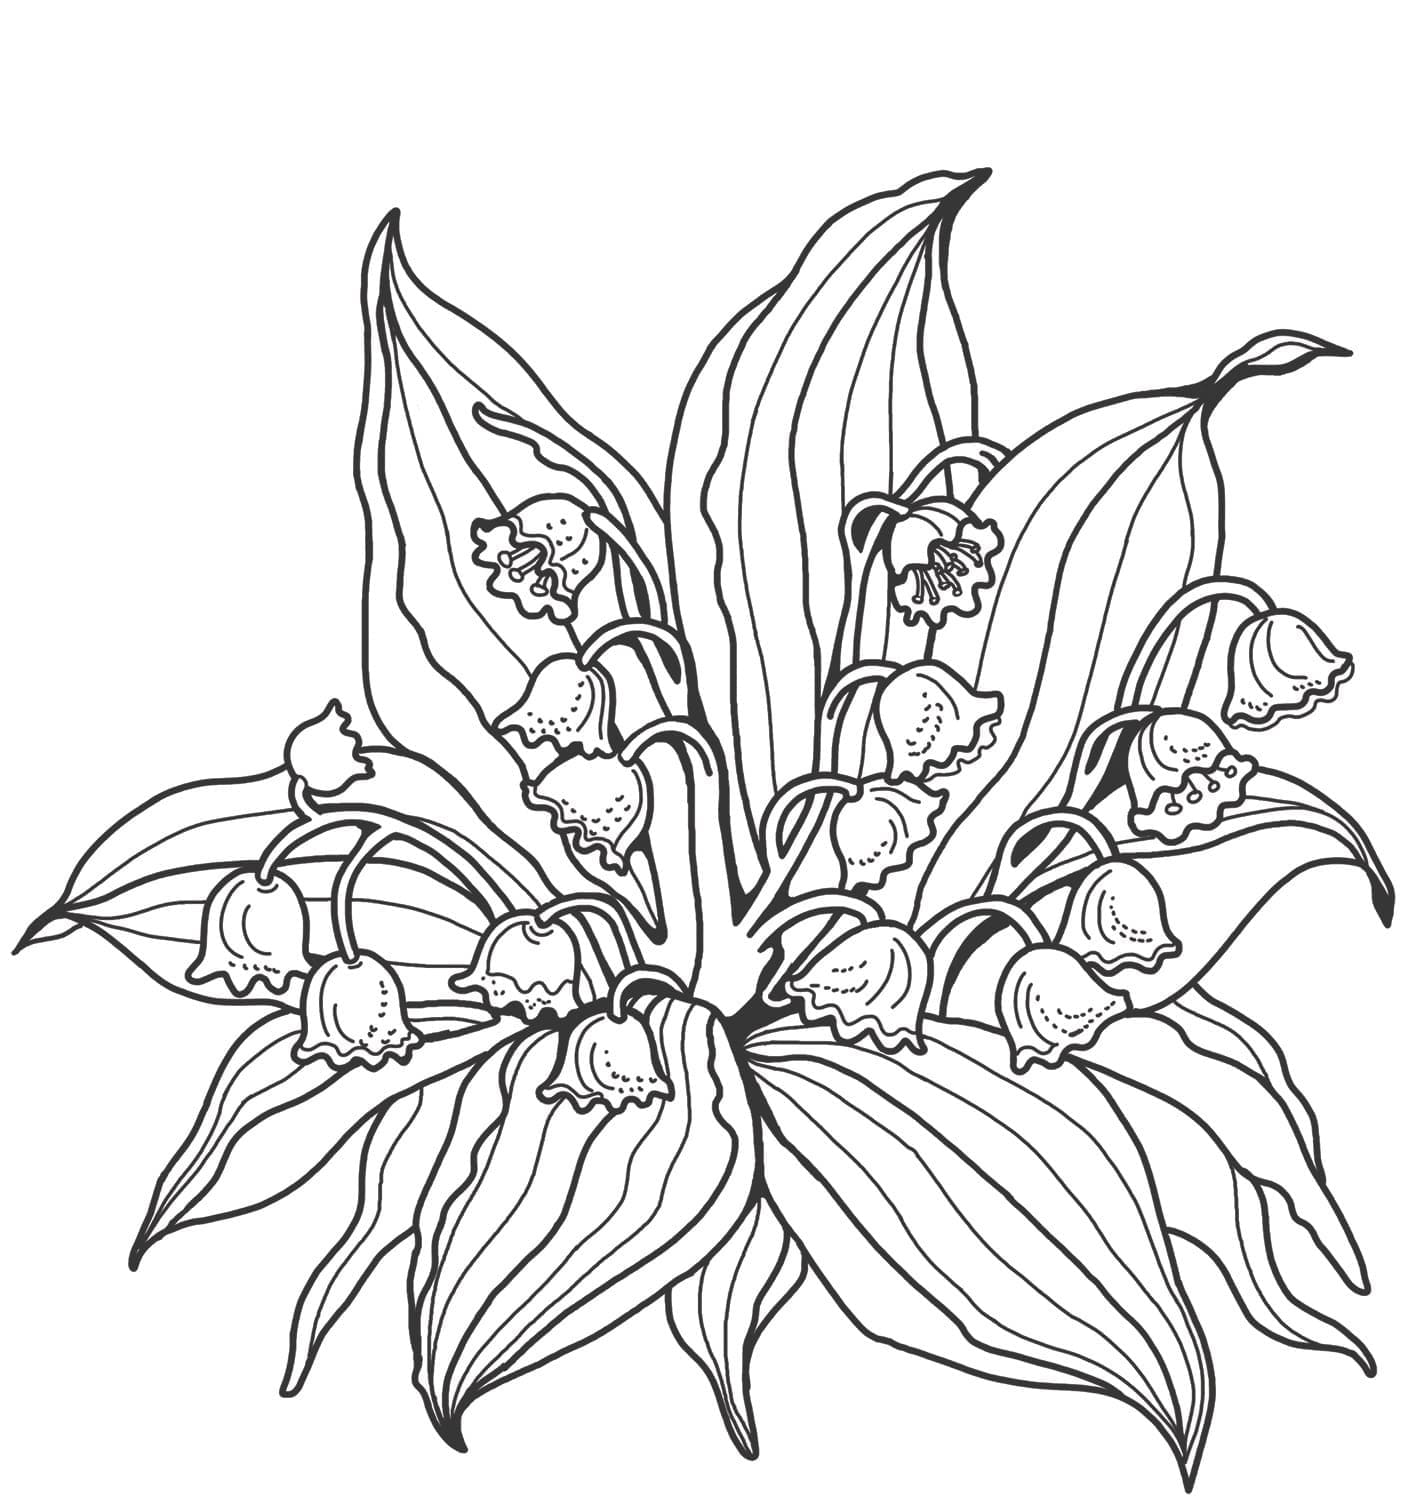 Lily of the Valley For Children coloring page - Download, Print or ...